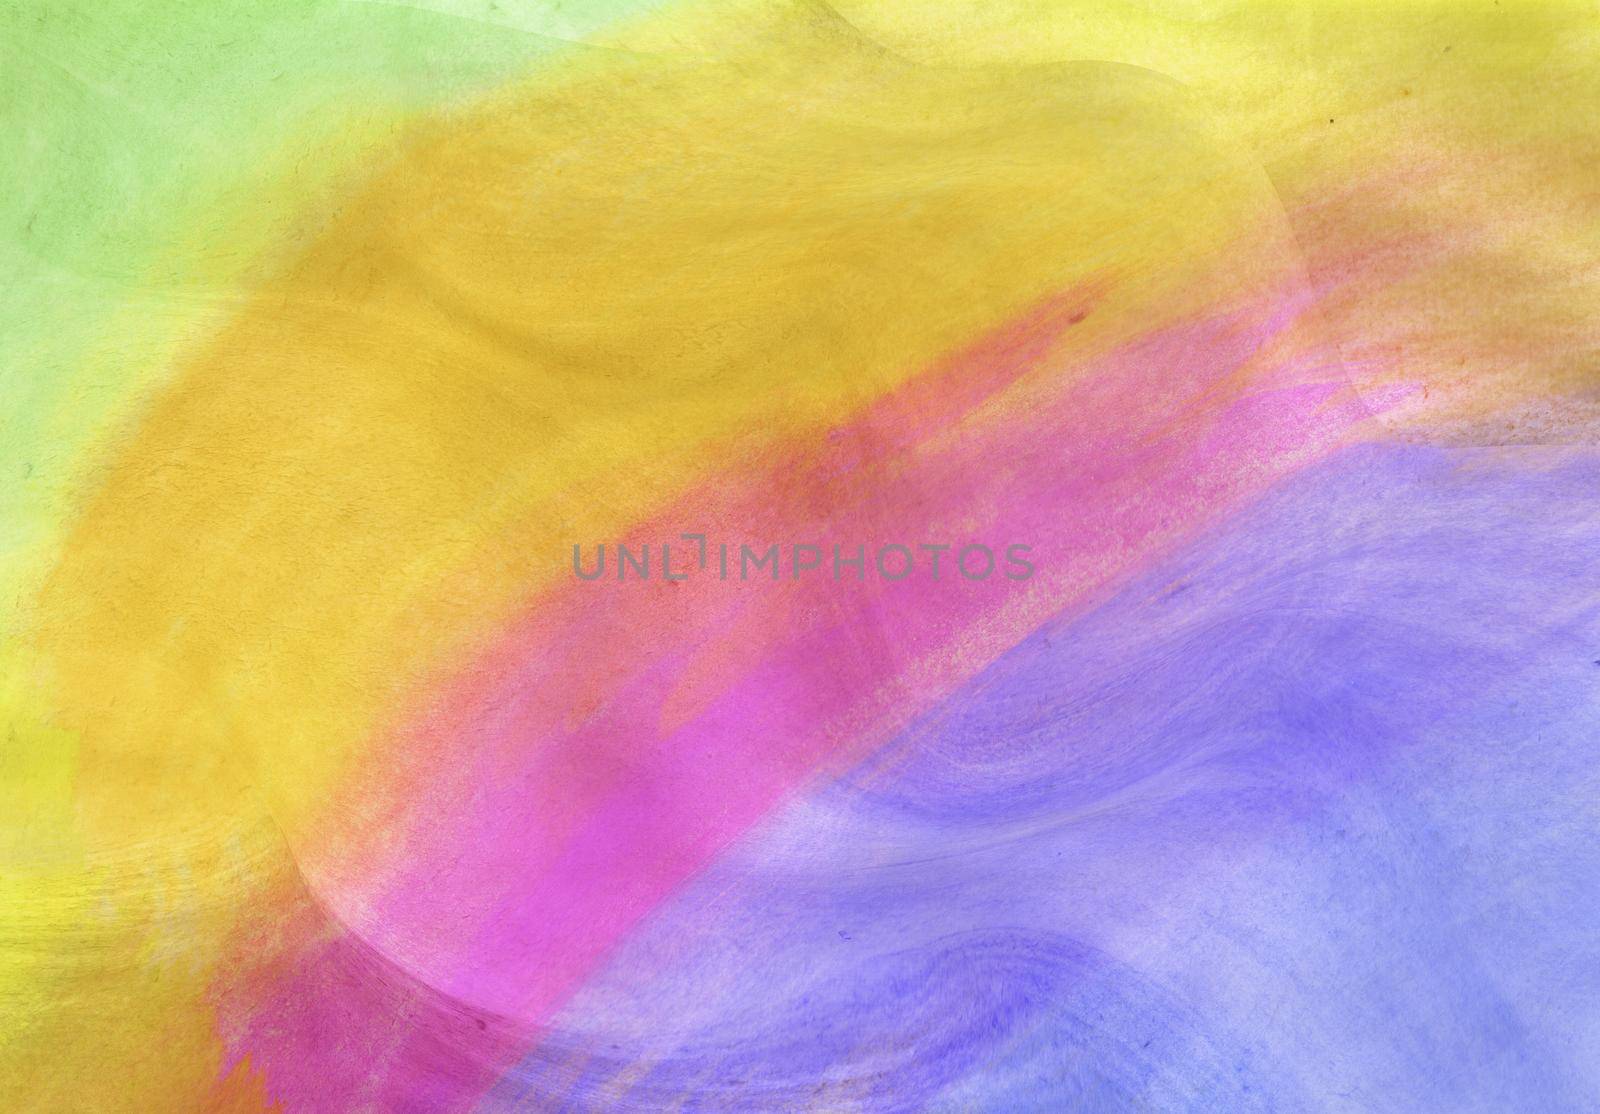 Color abstract watercolor background with texture effect and smooth transitions in different colors. Stock illustration for posters, postcards, banners and creative design.